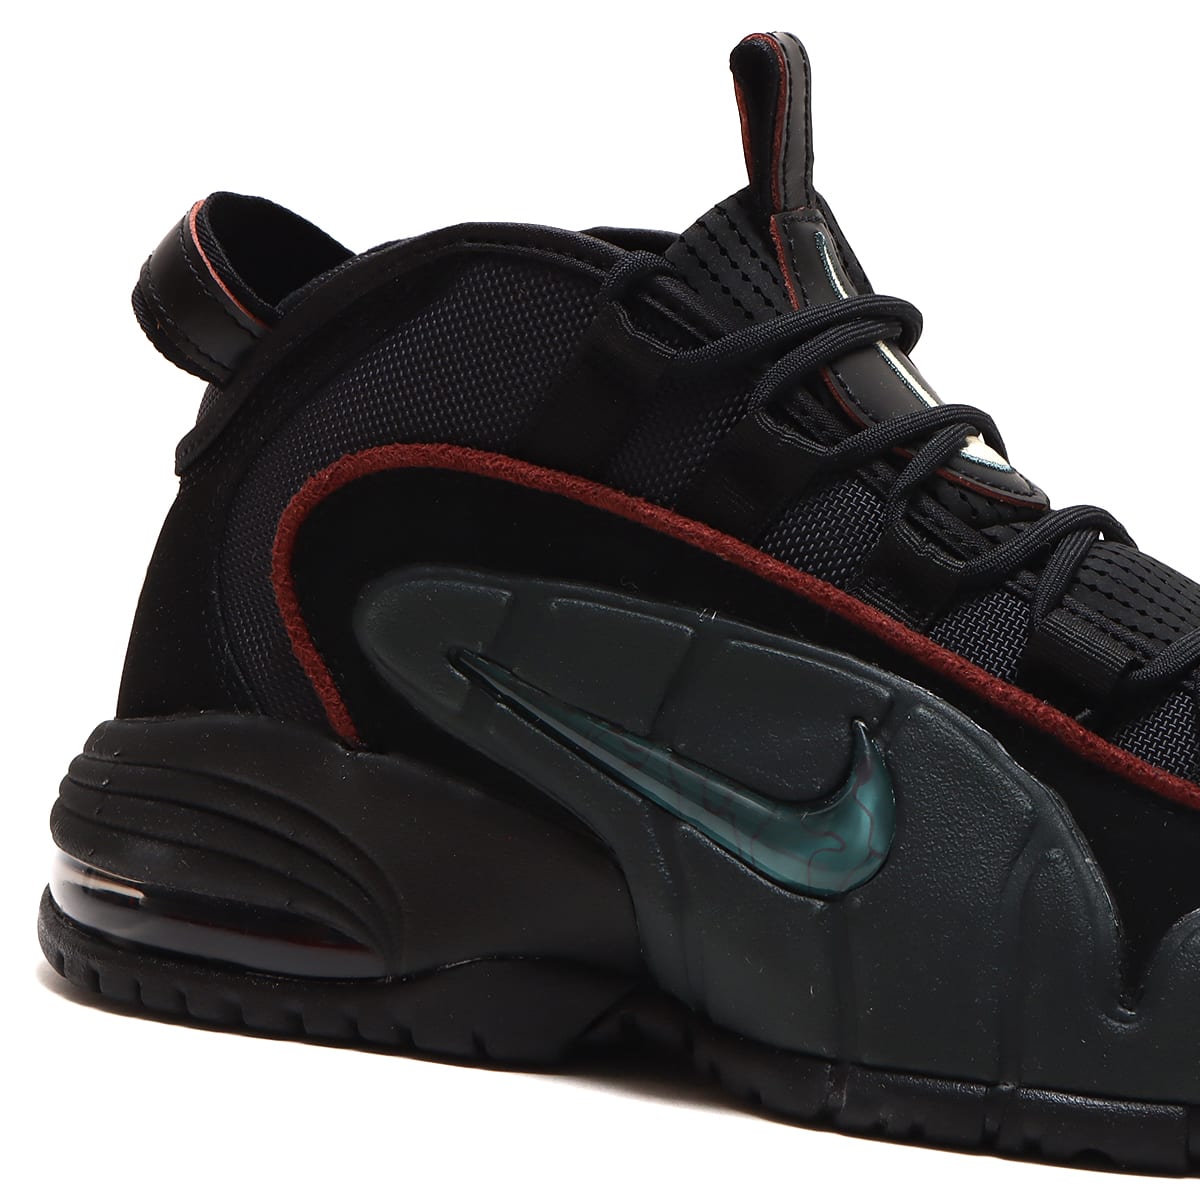 NIKE AIR MAX PENNY BLACK/FADED SPRUCE-ANTHRACITE-DARK PONY 23SP-I